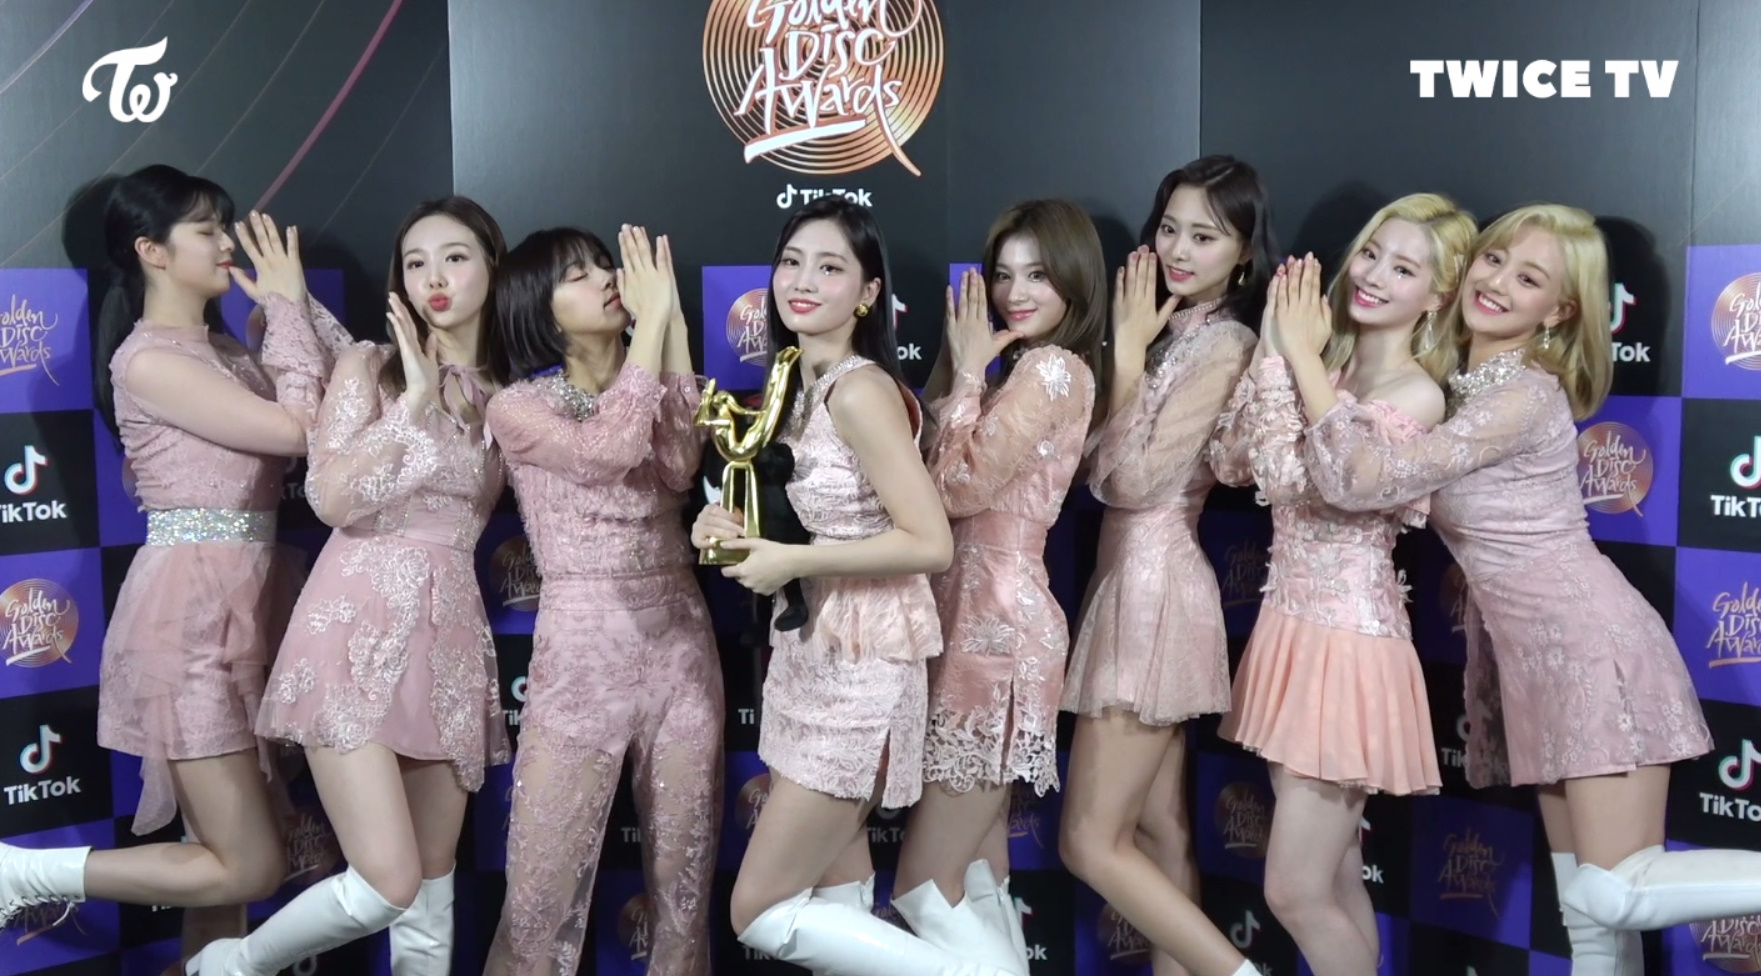 TWICE TV “34th Golden Disc Awards DAY 1”